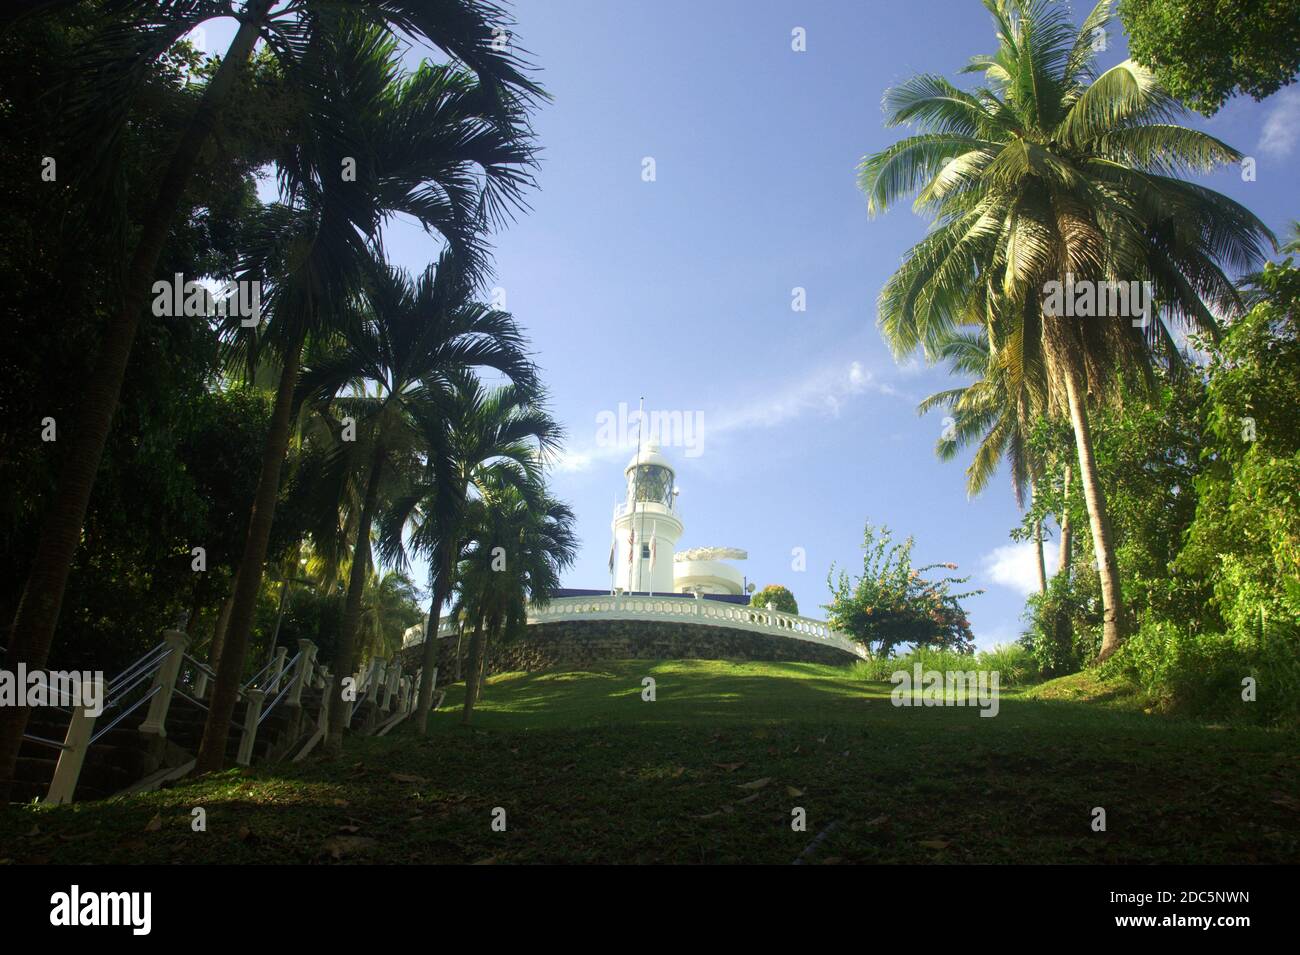 a white light house on the hill at Tanjung Tuan Port Dickson Malaysia Stock Photo